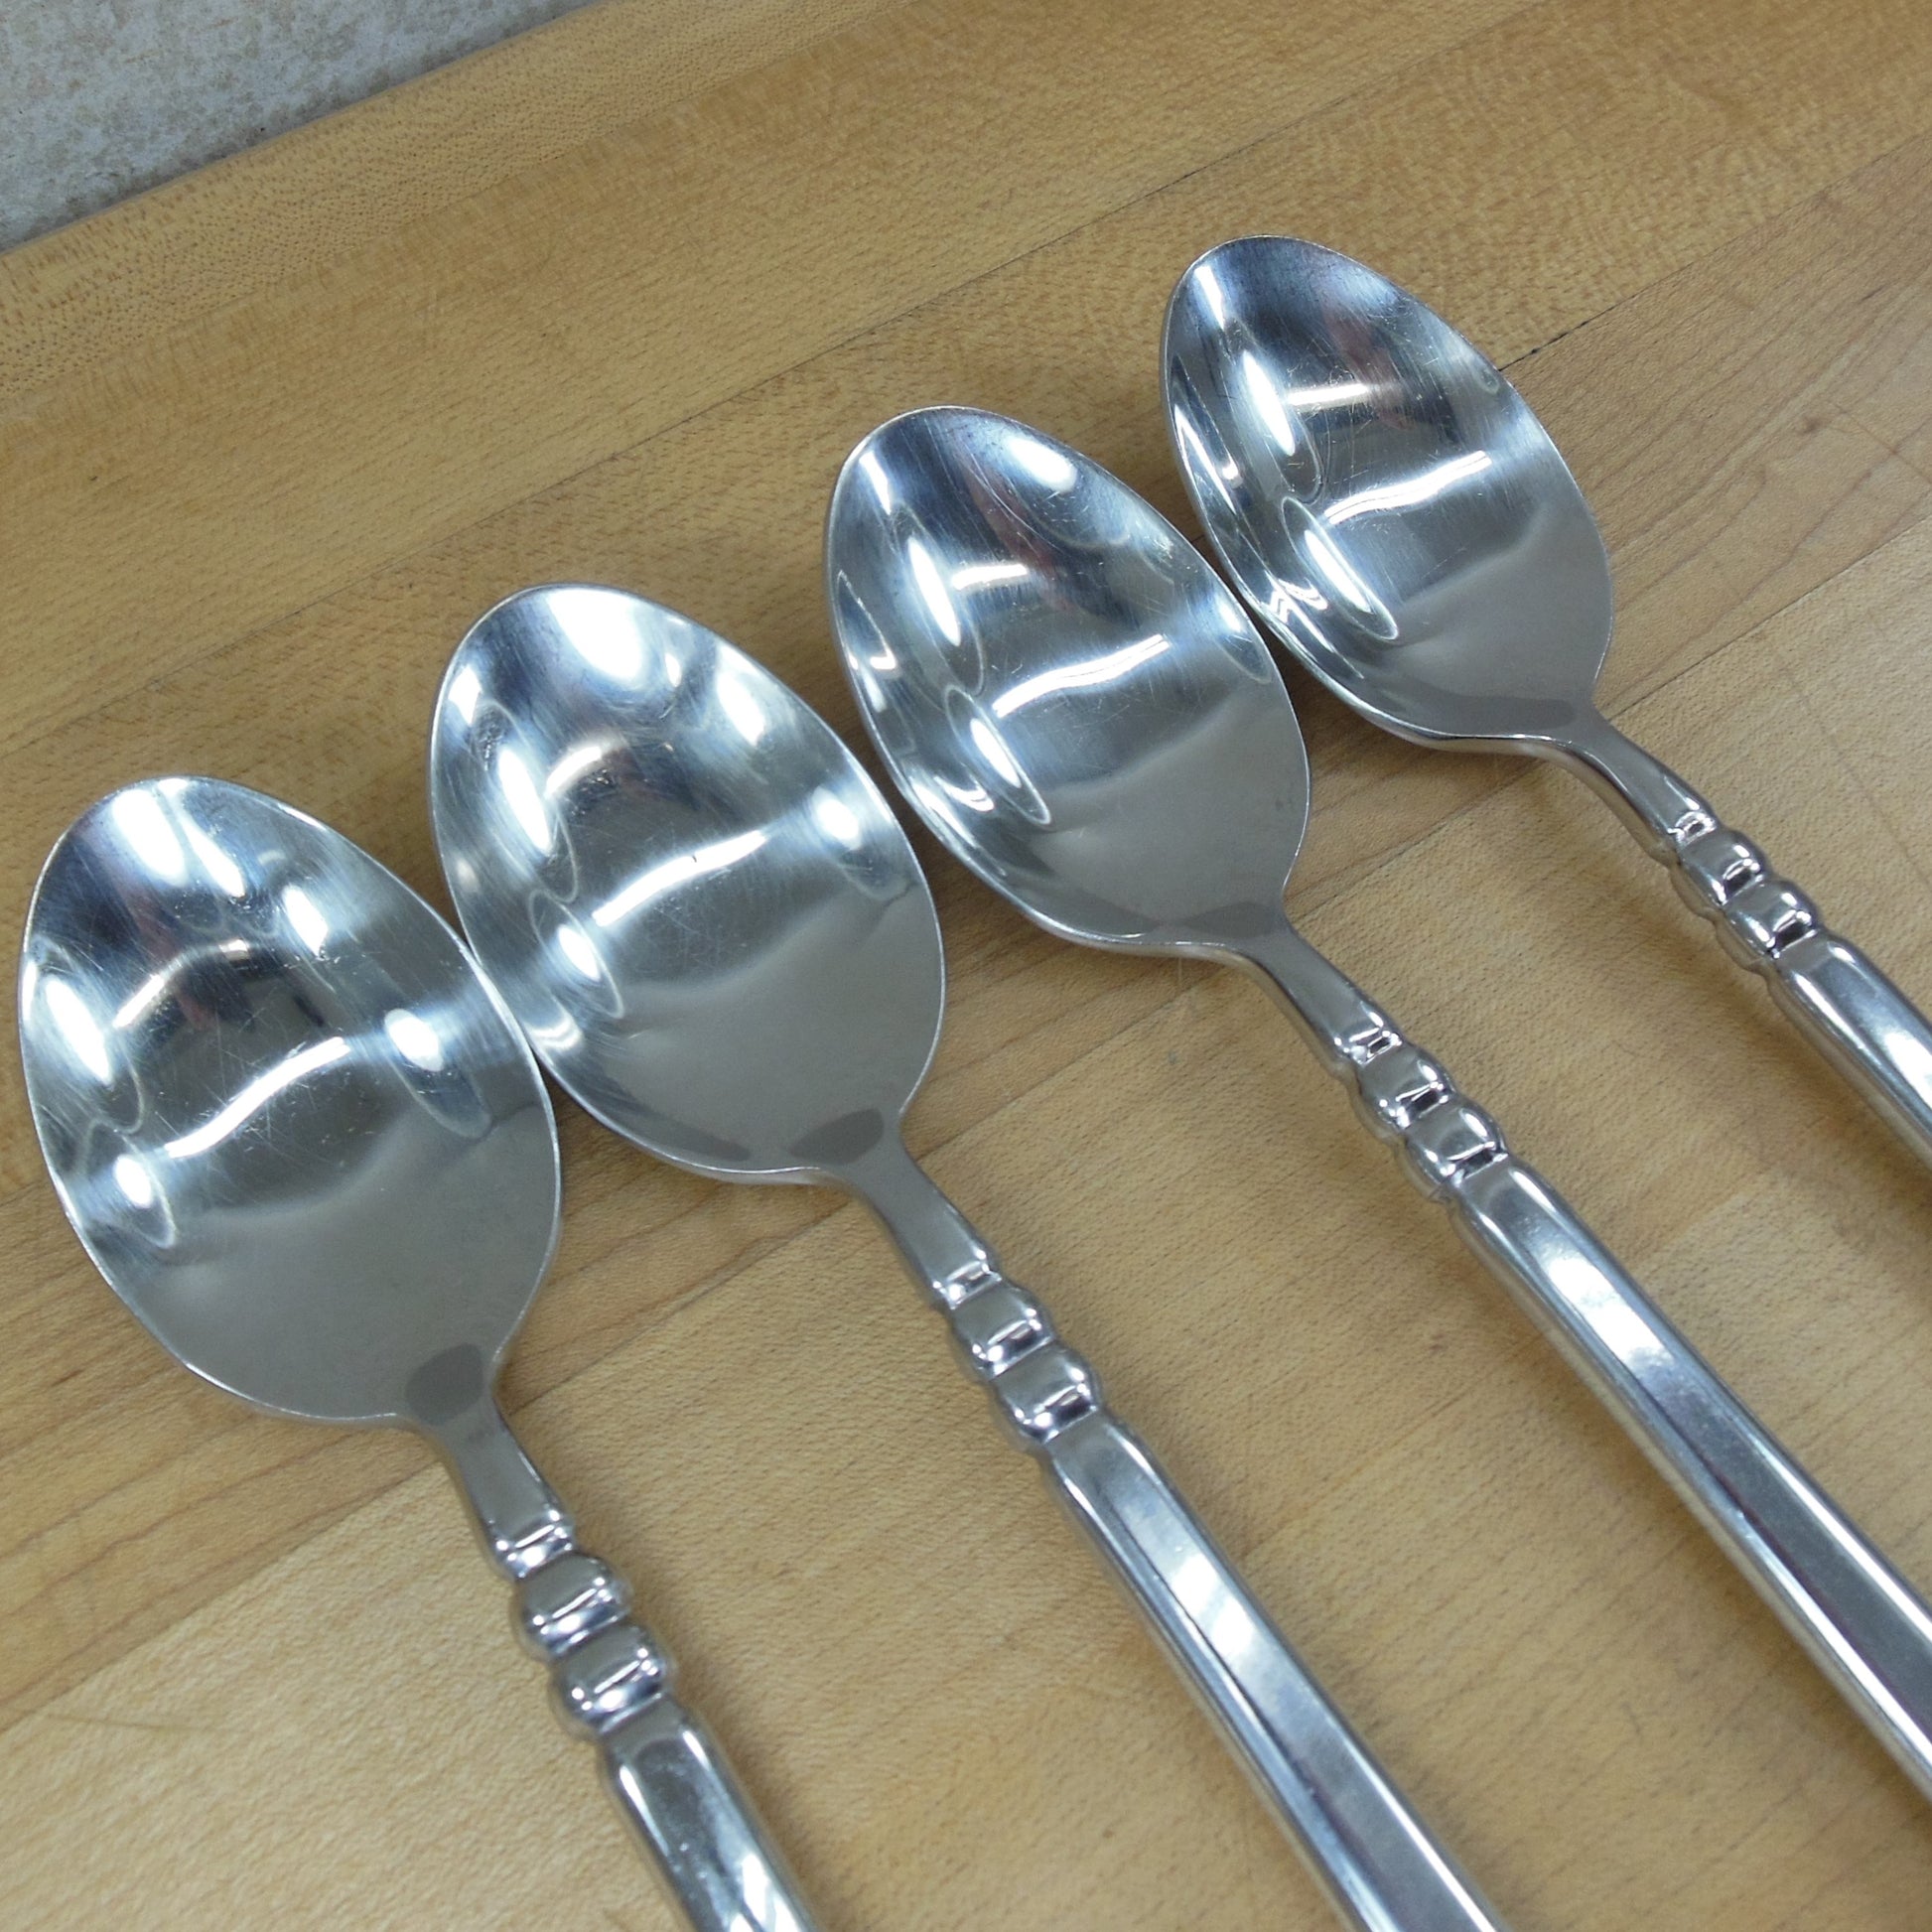 Oneida China Tortola Stainless Flatware - 4 Place/Soup Spoons Used